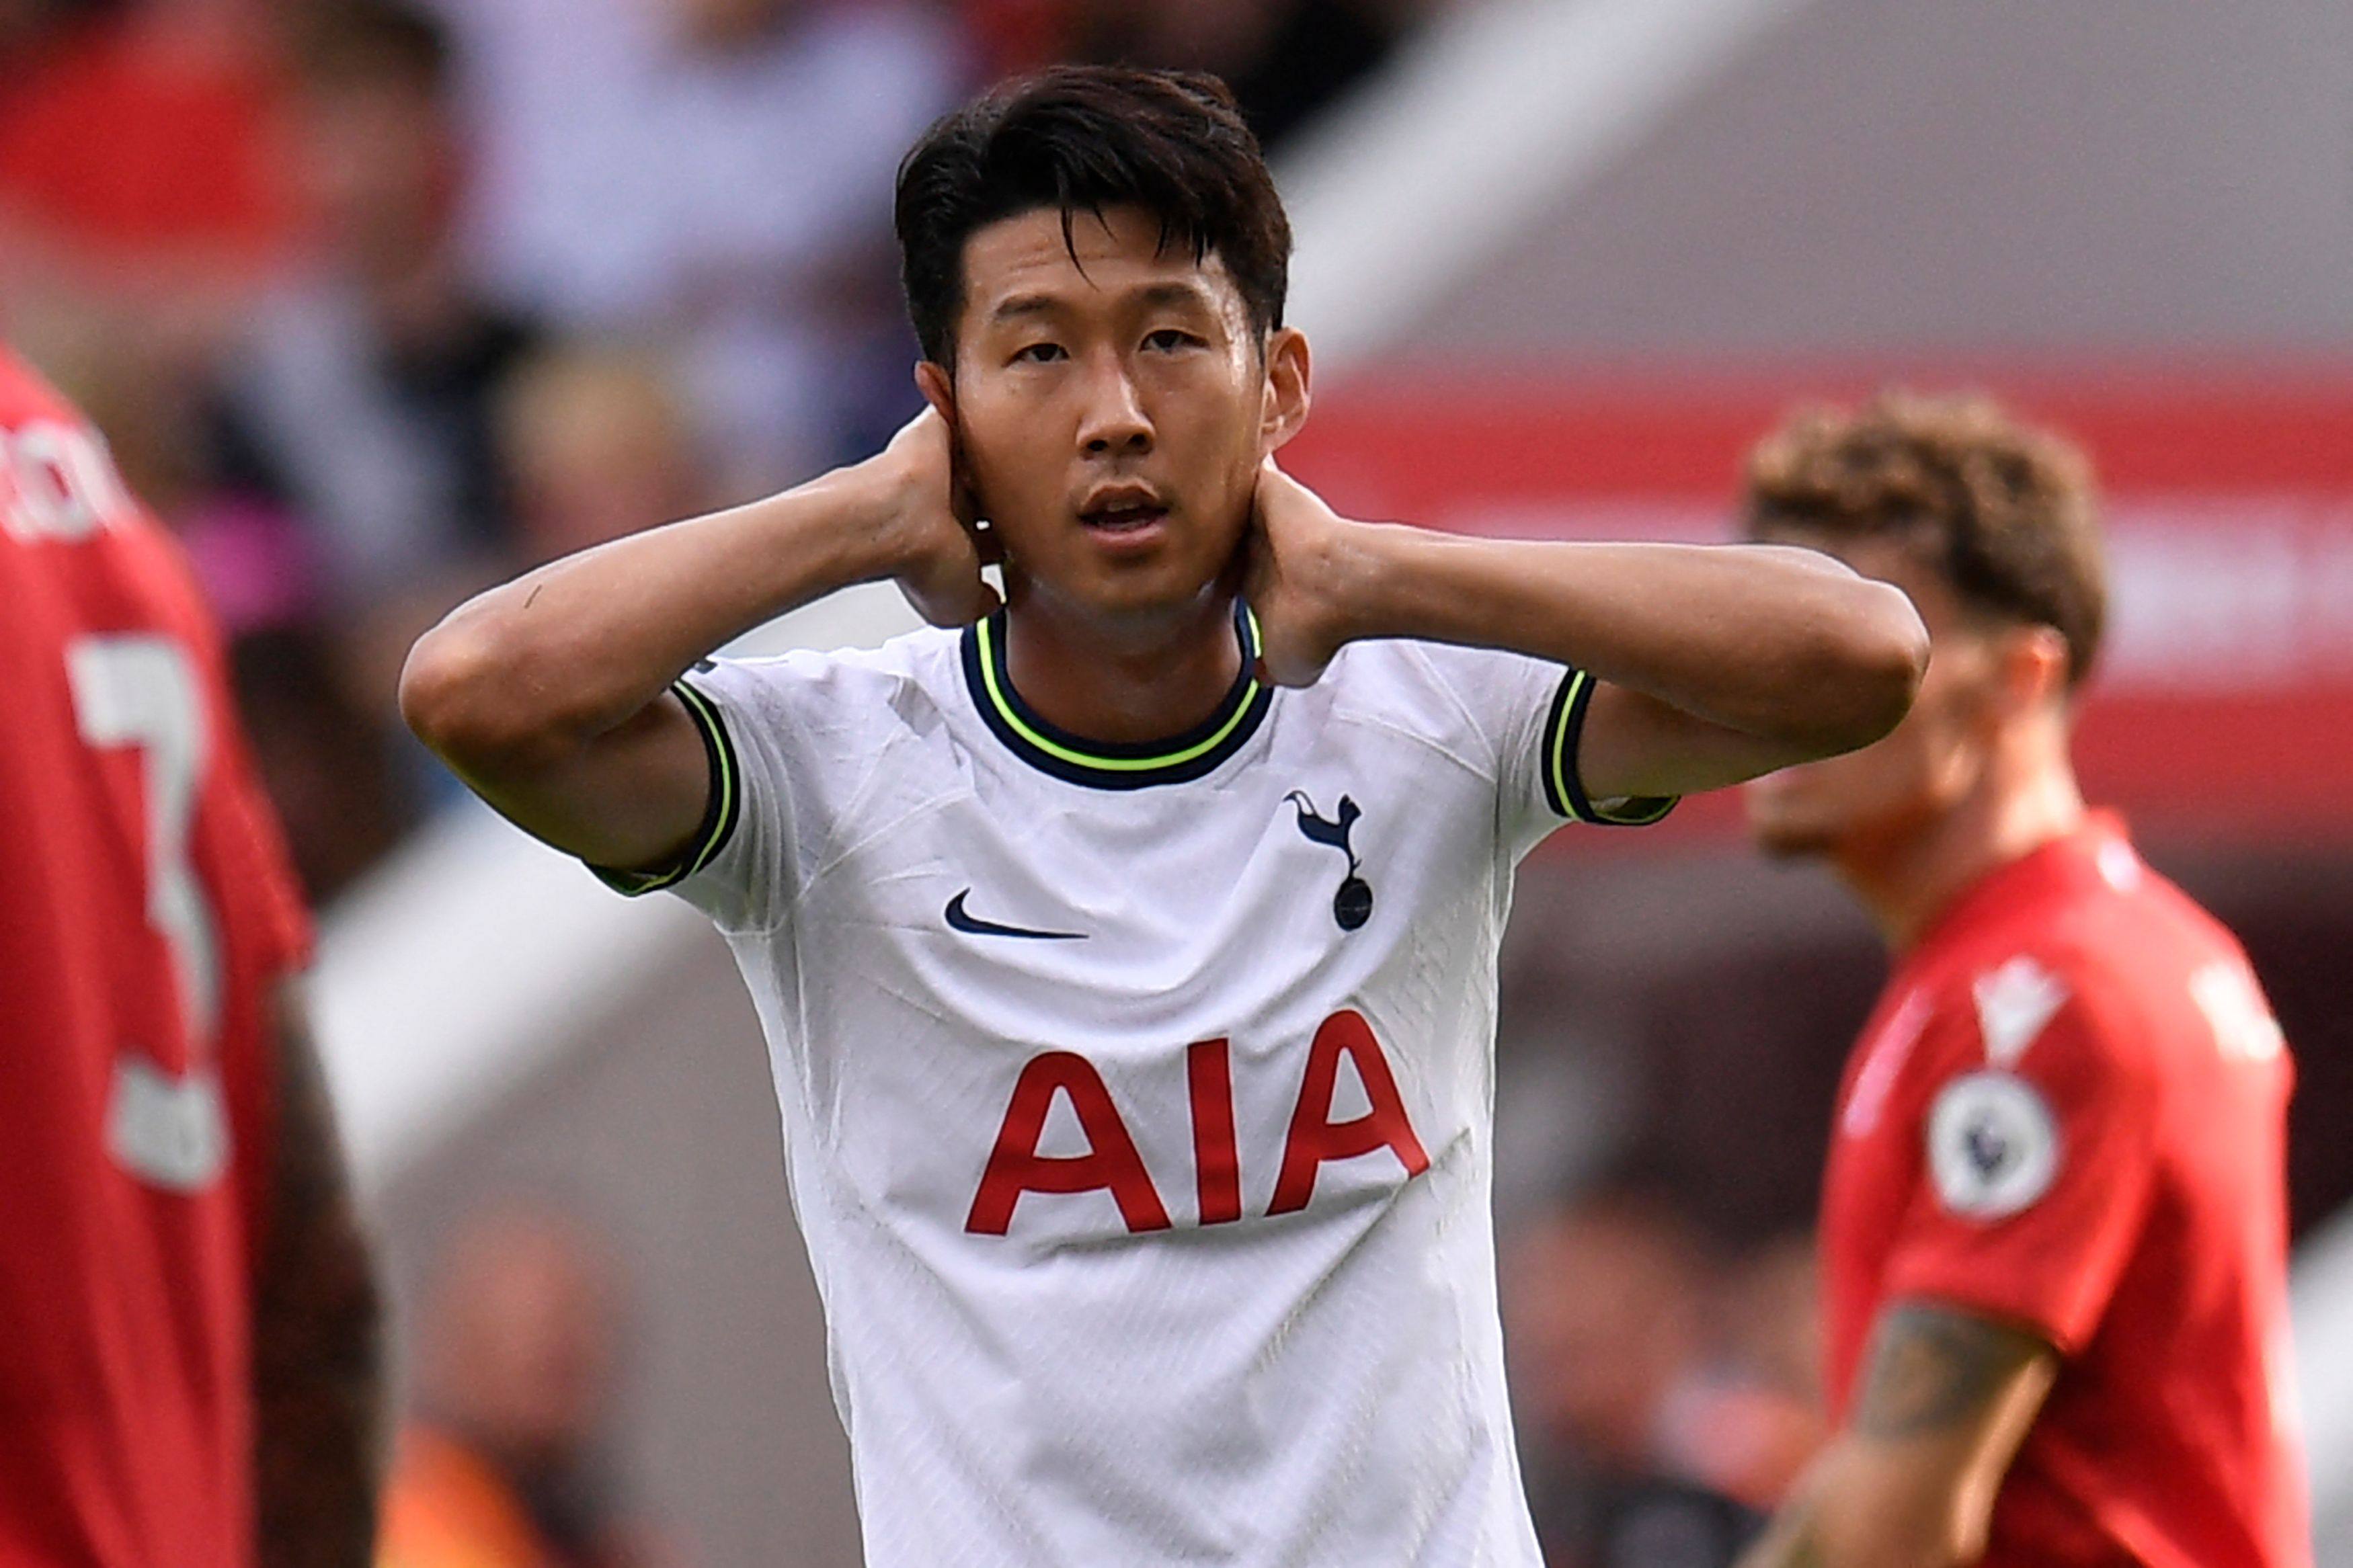 Son Heung-min has not scored yet this season for Tottenham Hotspur. Photo: AFP